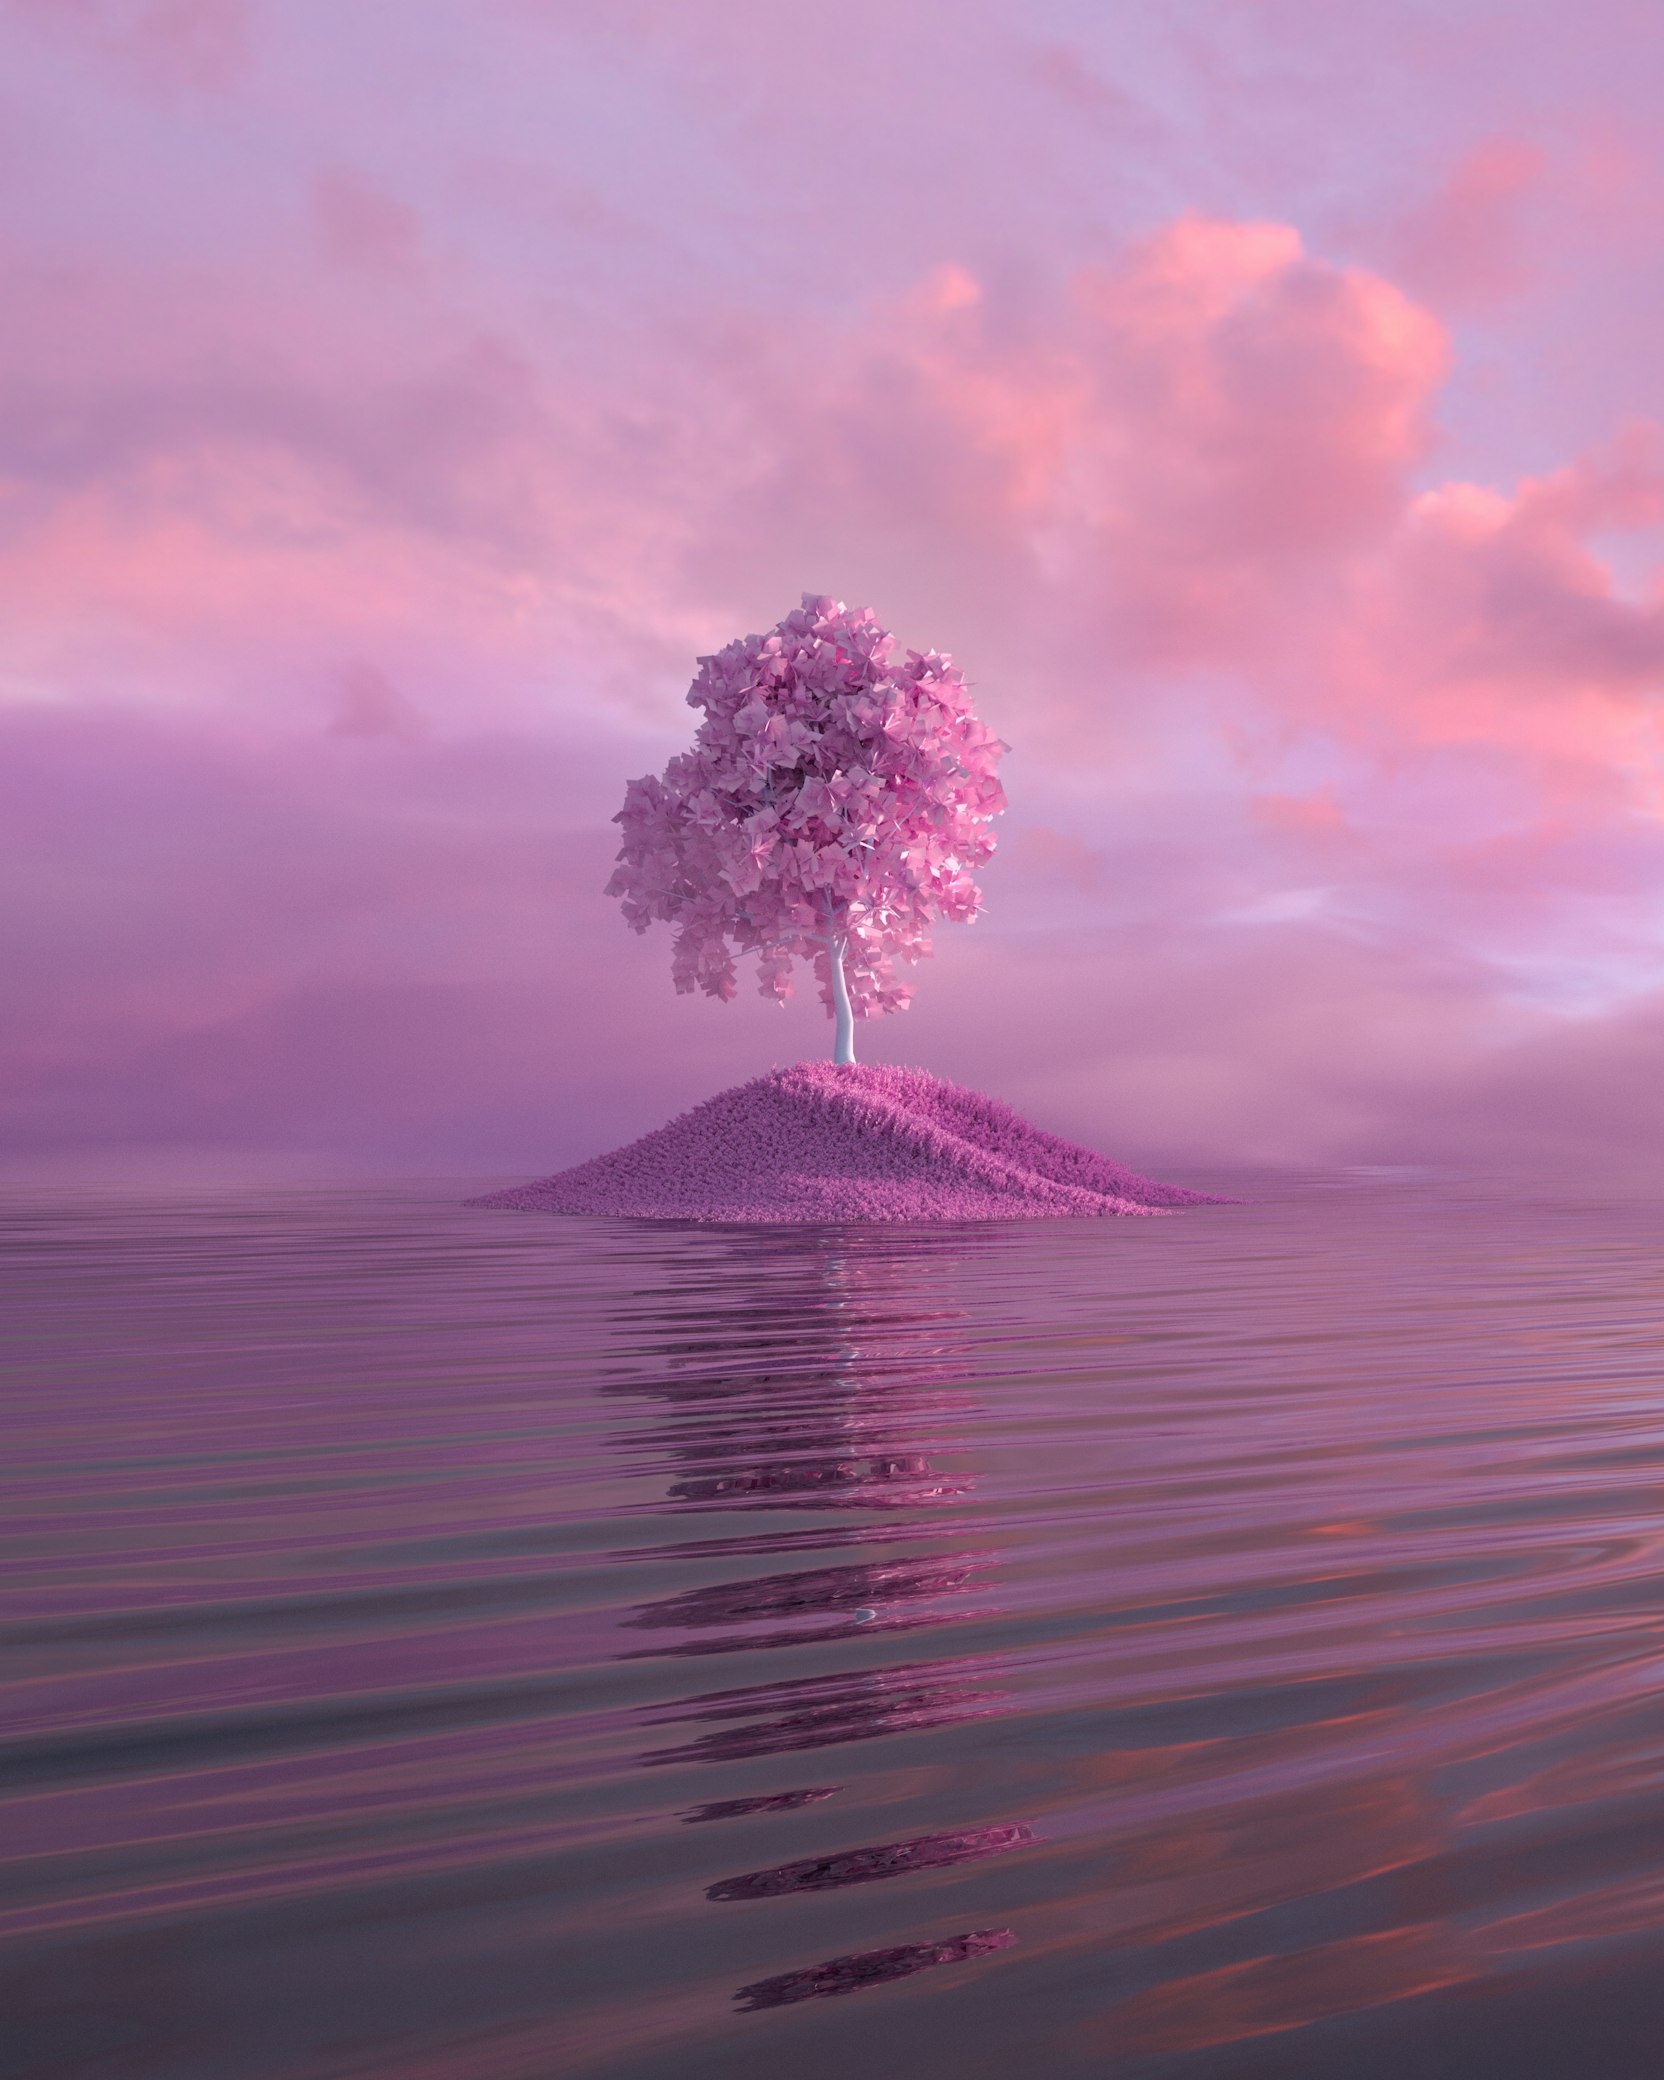 3D rendering of a mystical island with a pink tree surrounded by water